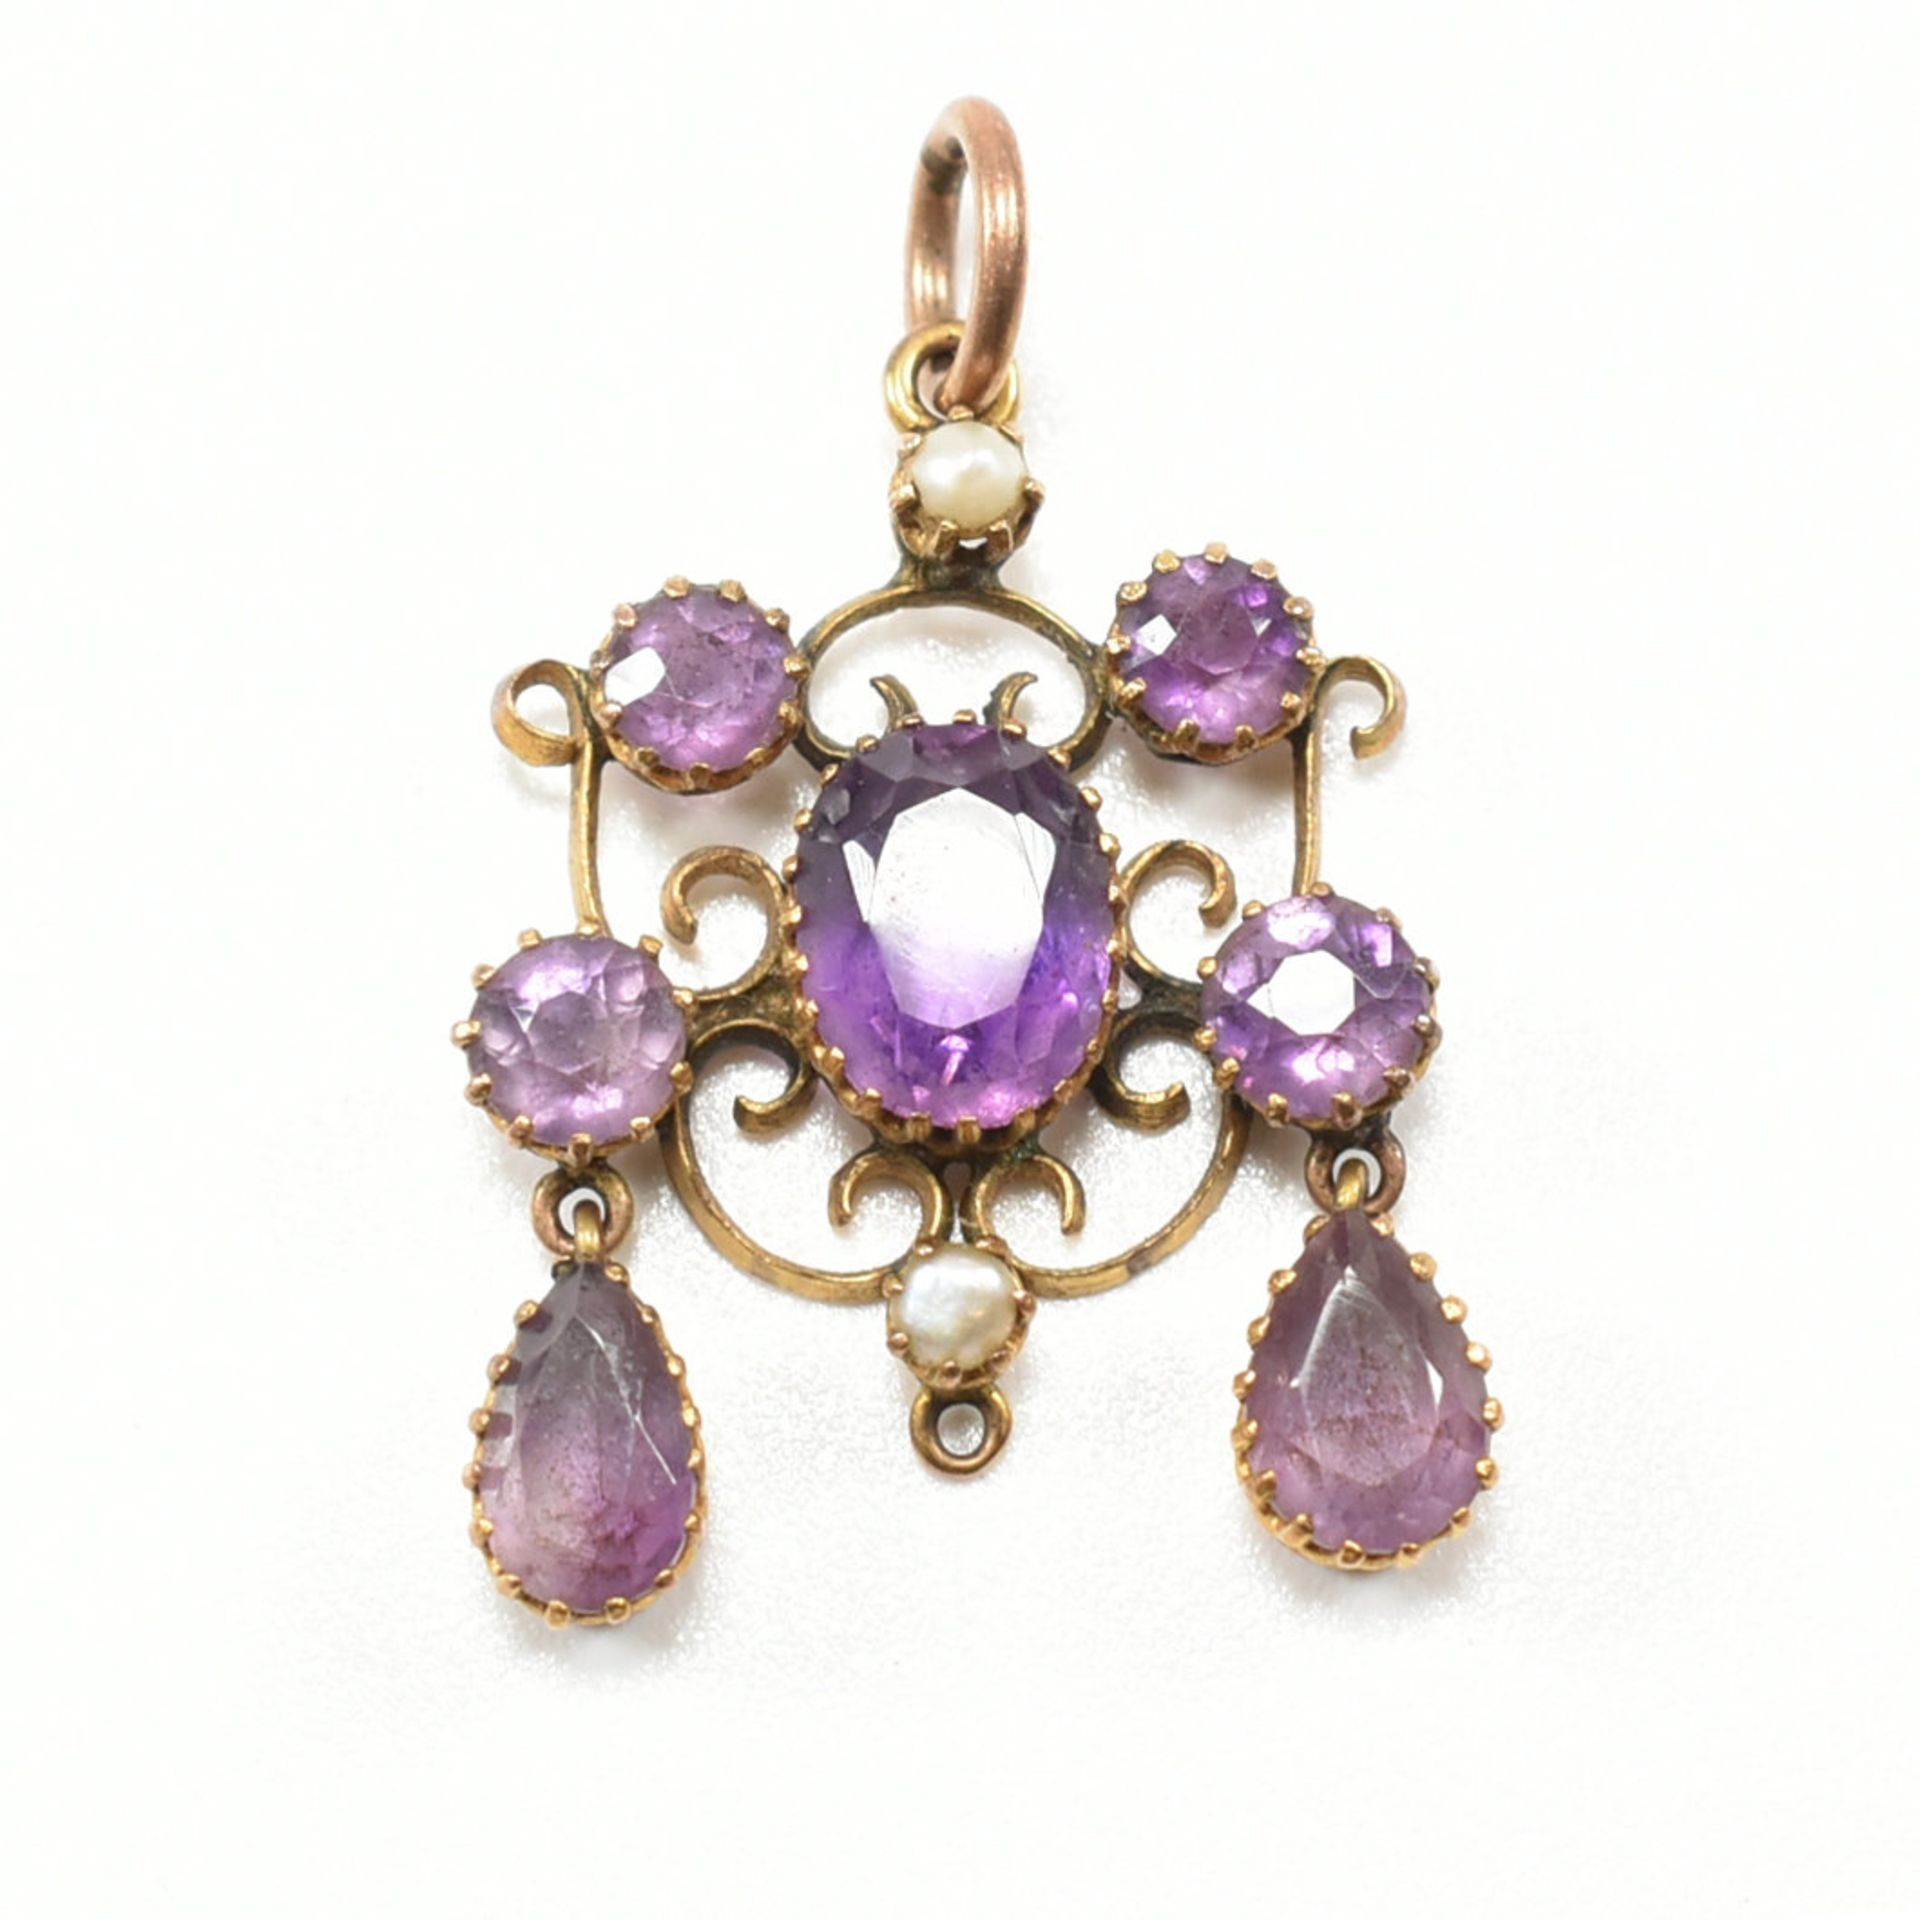 HALLMARKED 9CT GOLD NECKLACE CHAIN WITH AMETHYST & PEARL PENDANT - Image 4 of 5